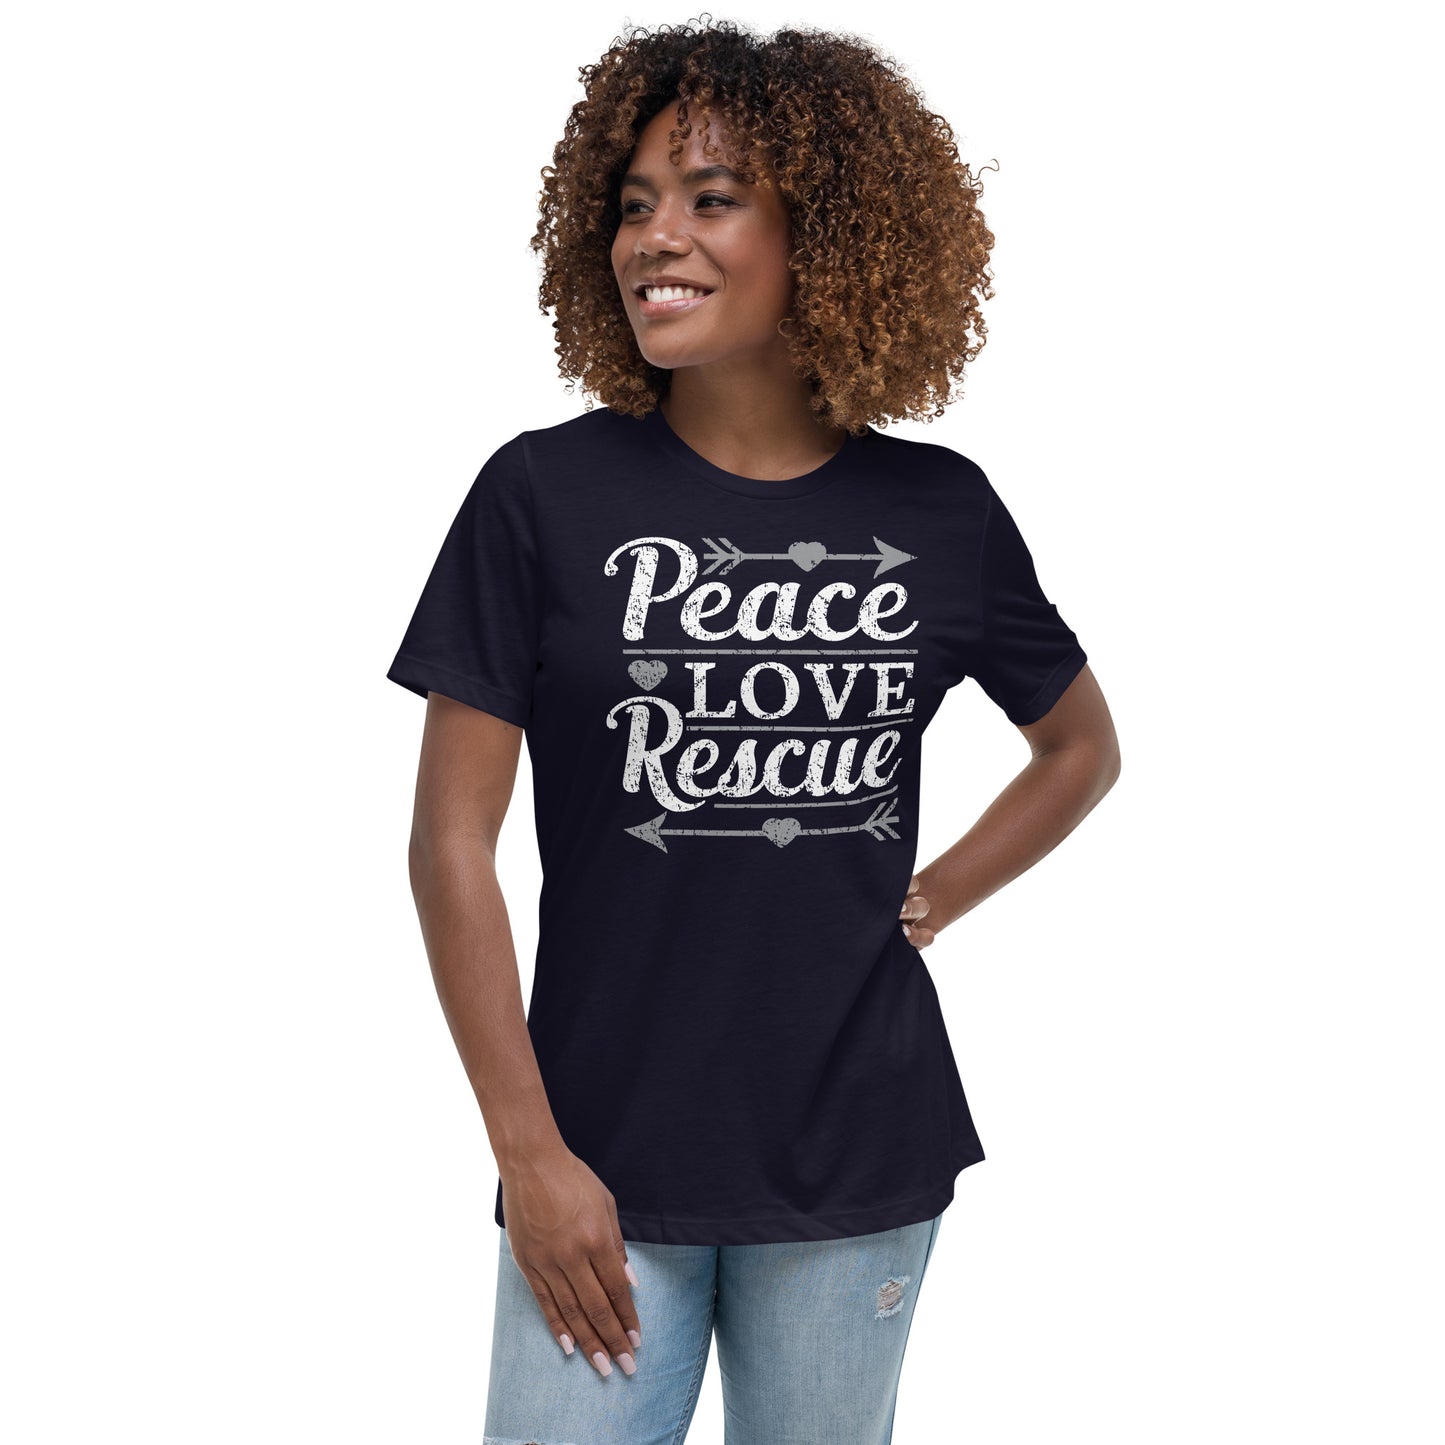 Peace love rescue women’s relaxed fit t-shirts by Dog Artistry navy color